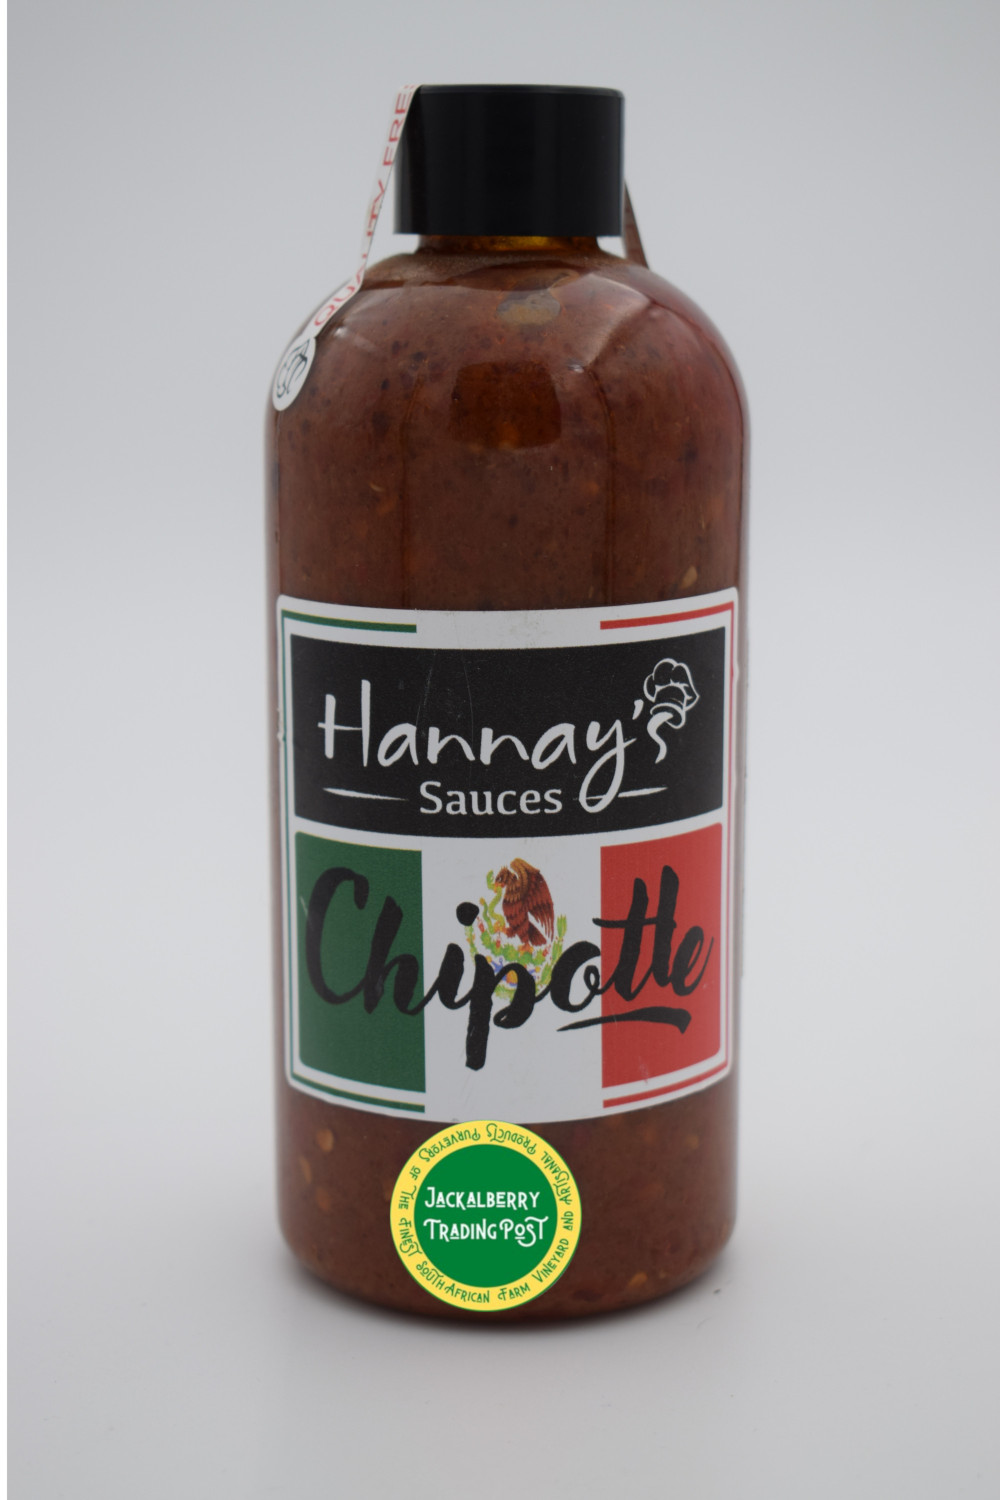 Hannay's Sauces Chipotle